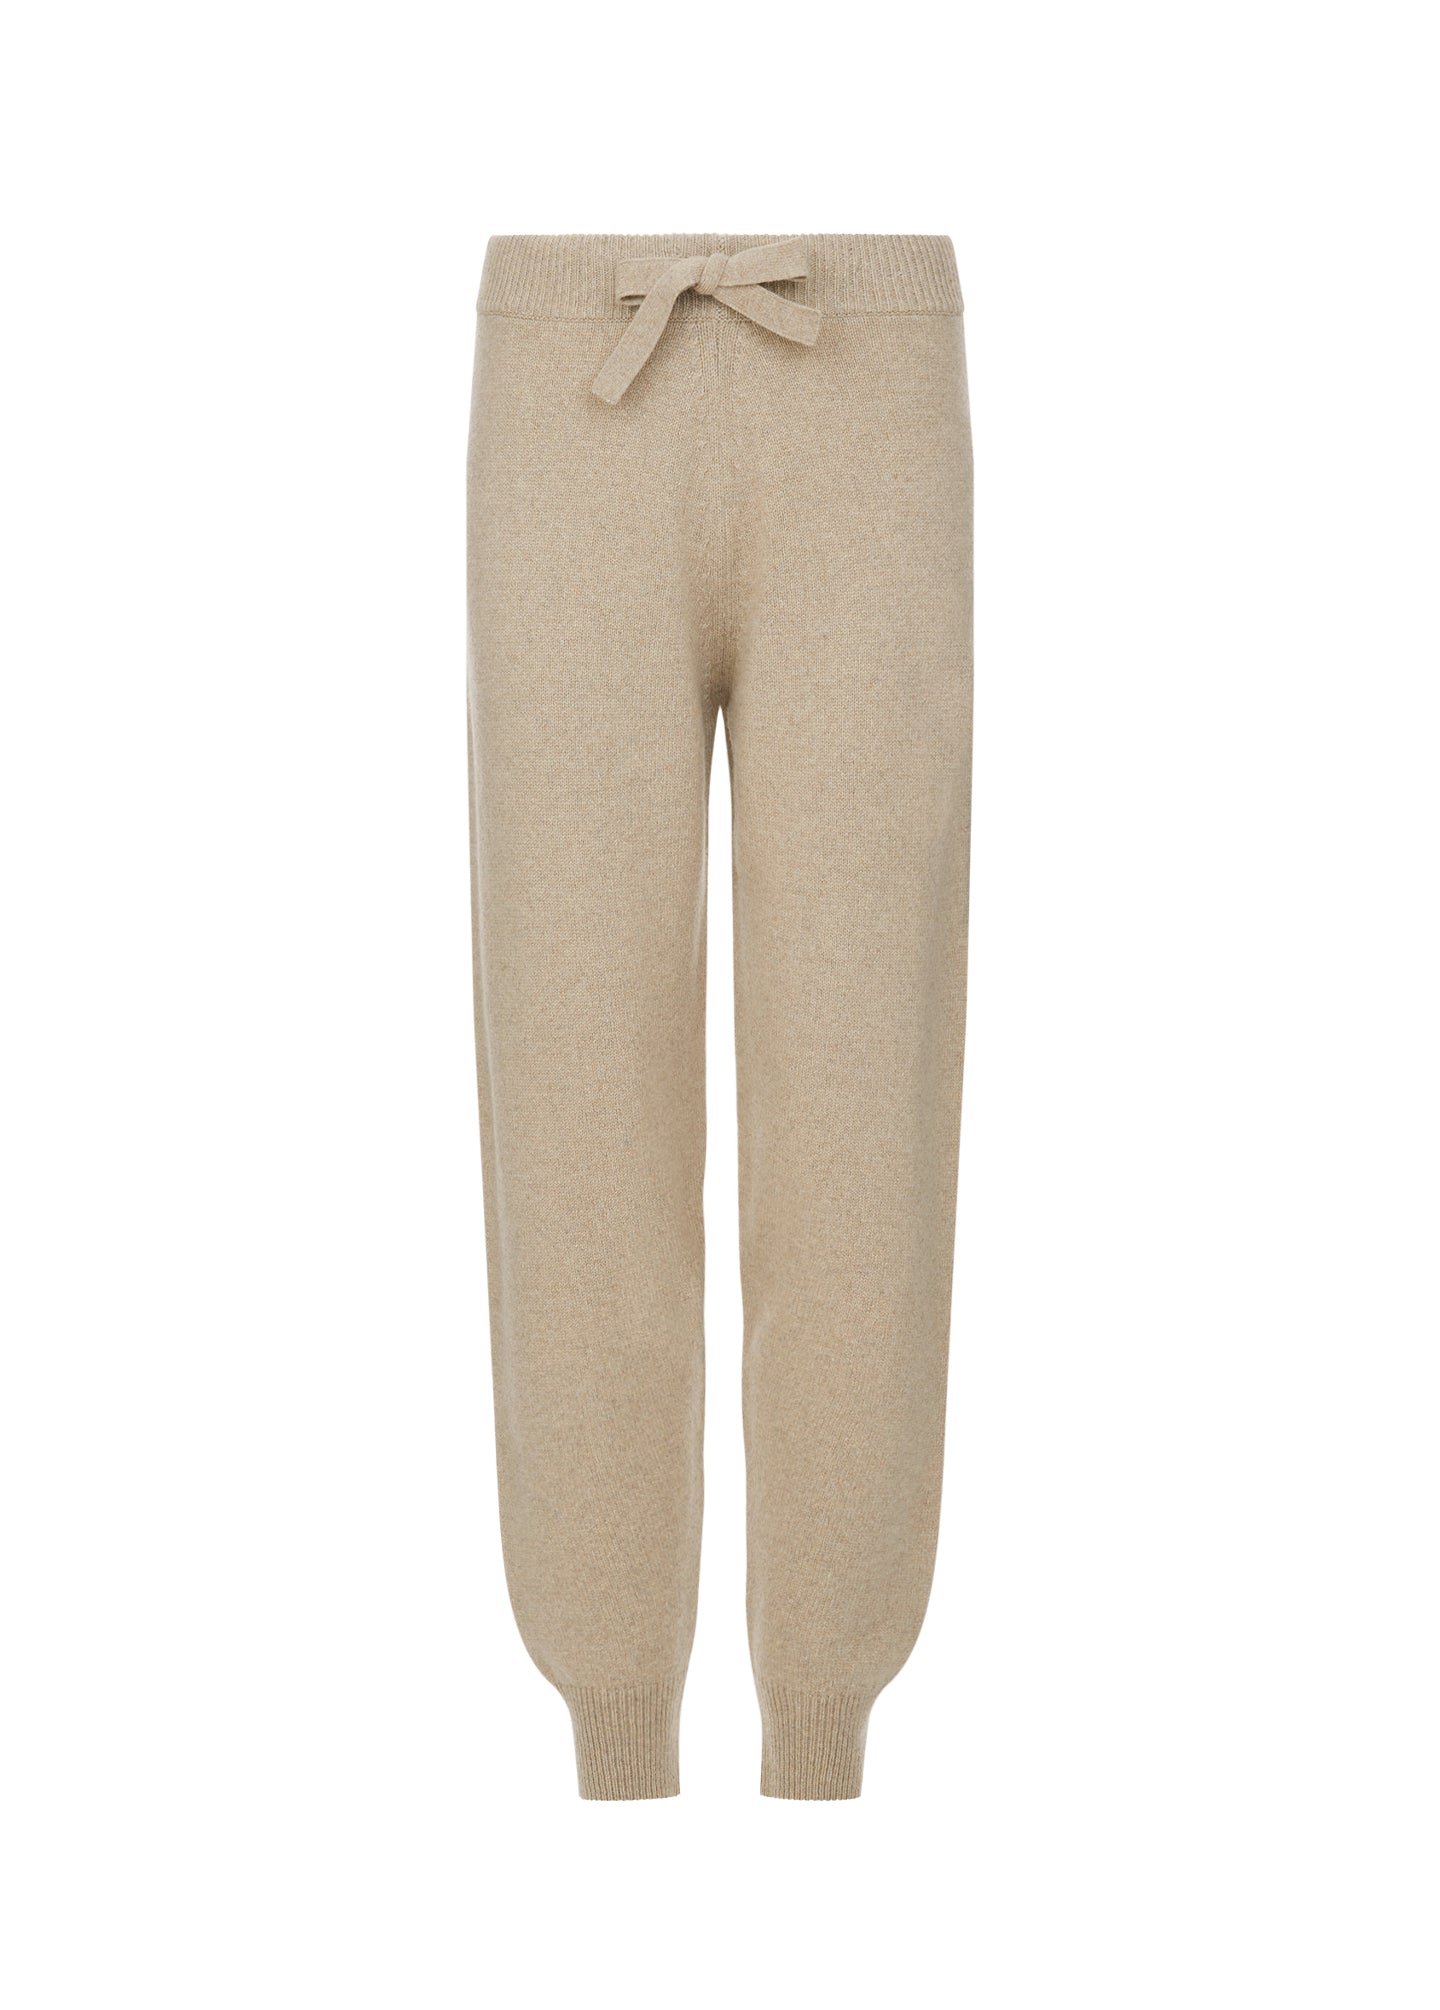 Cashmere women's knitted joggers in sand